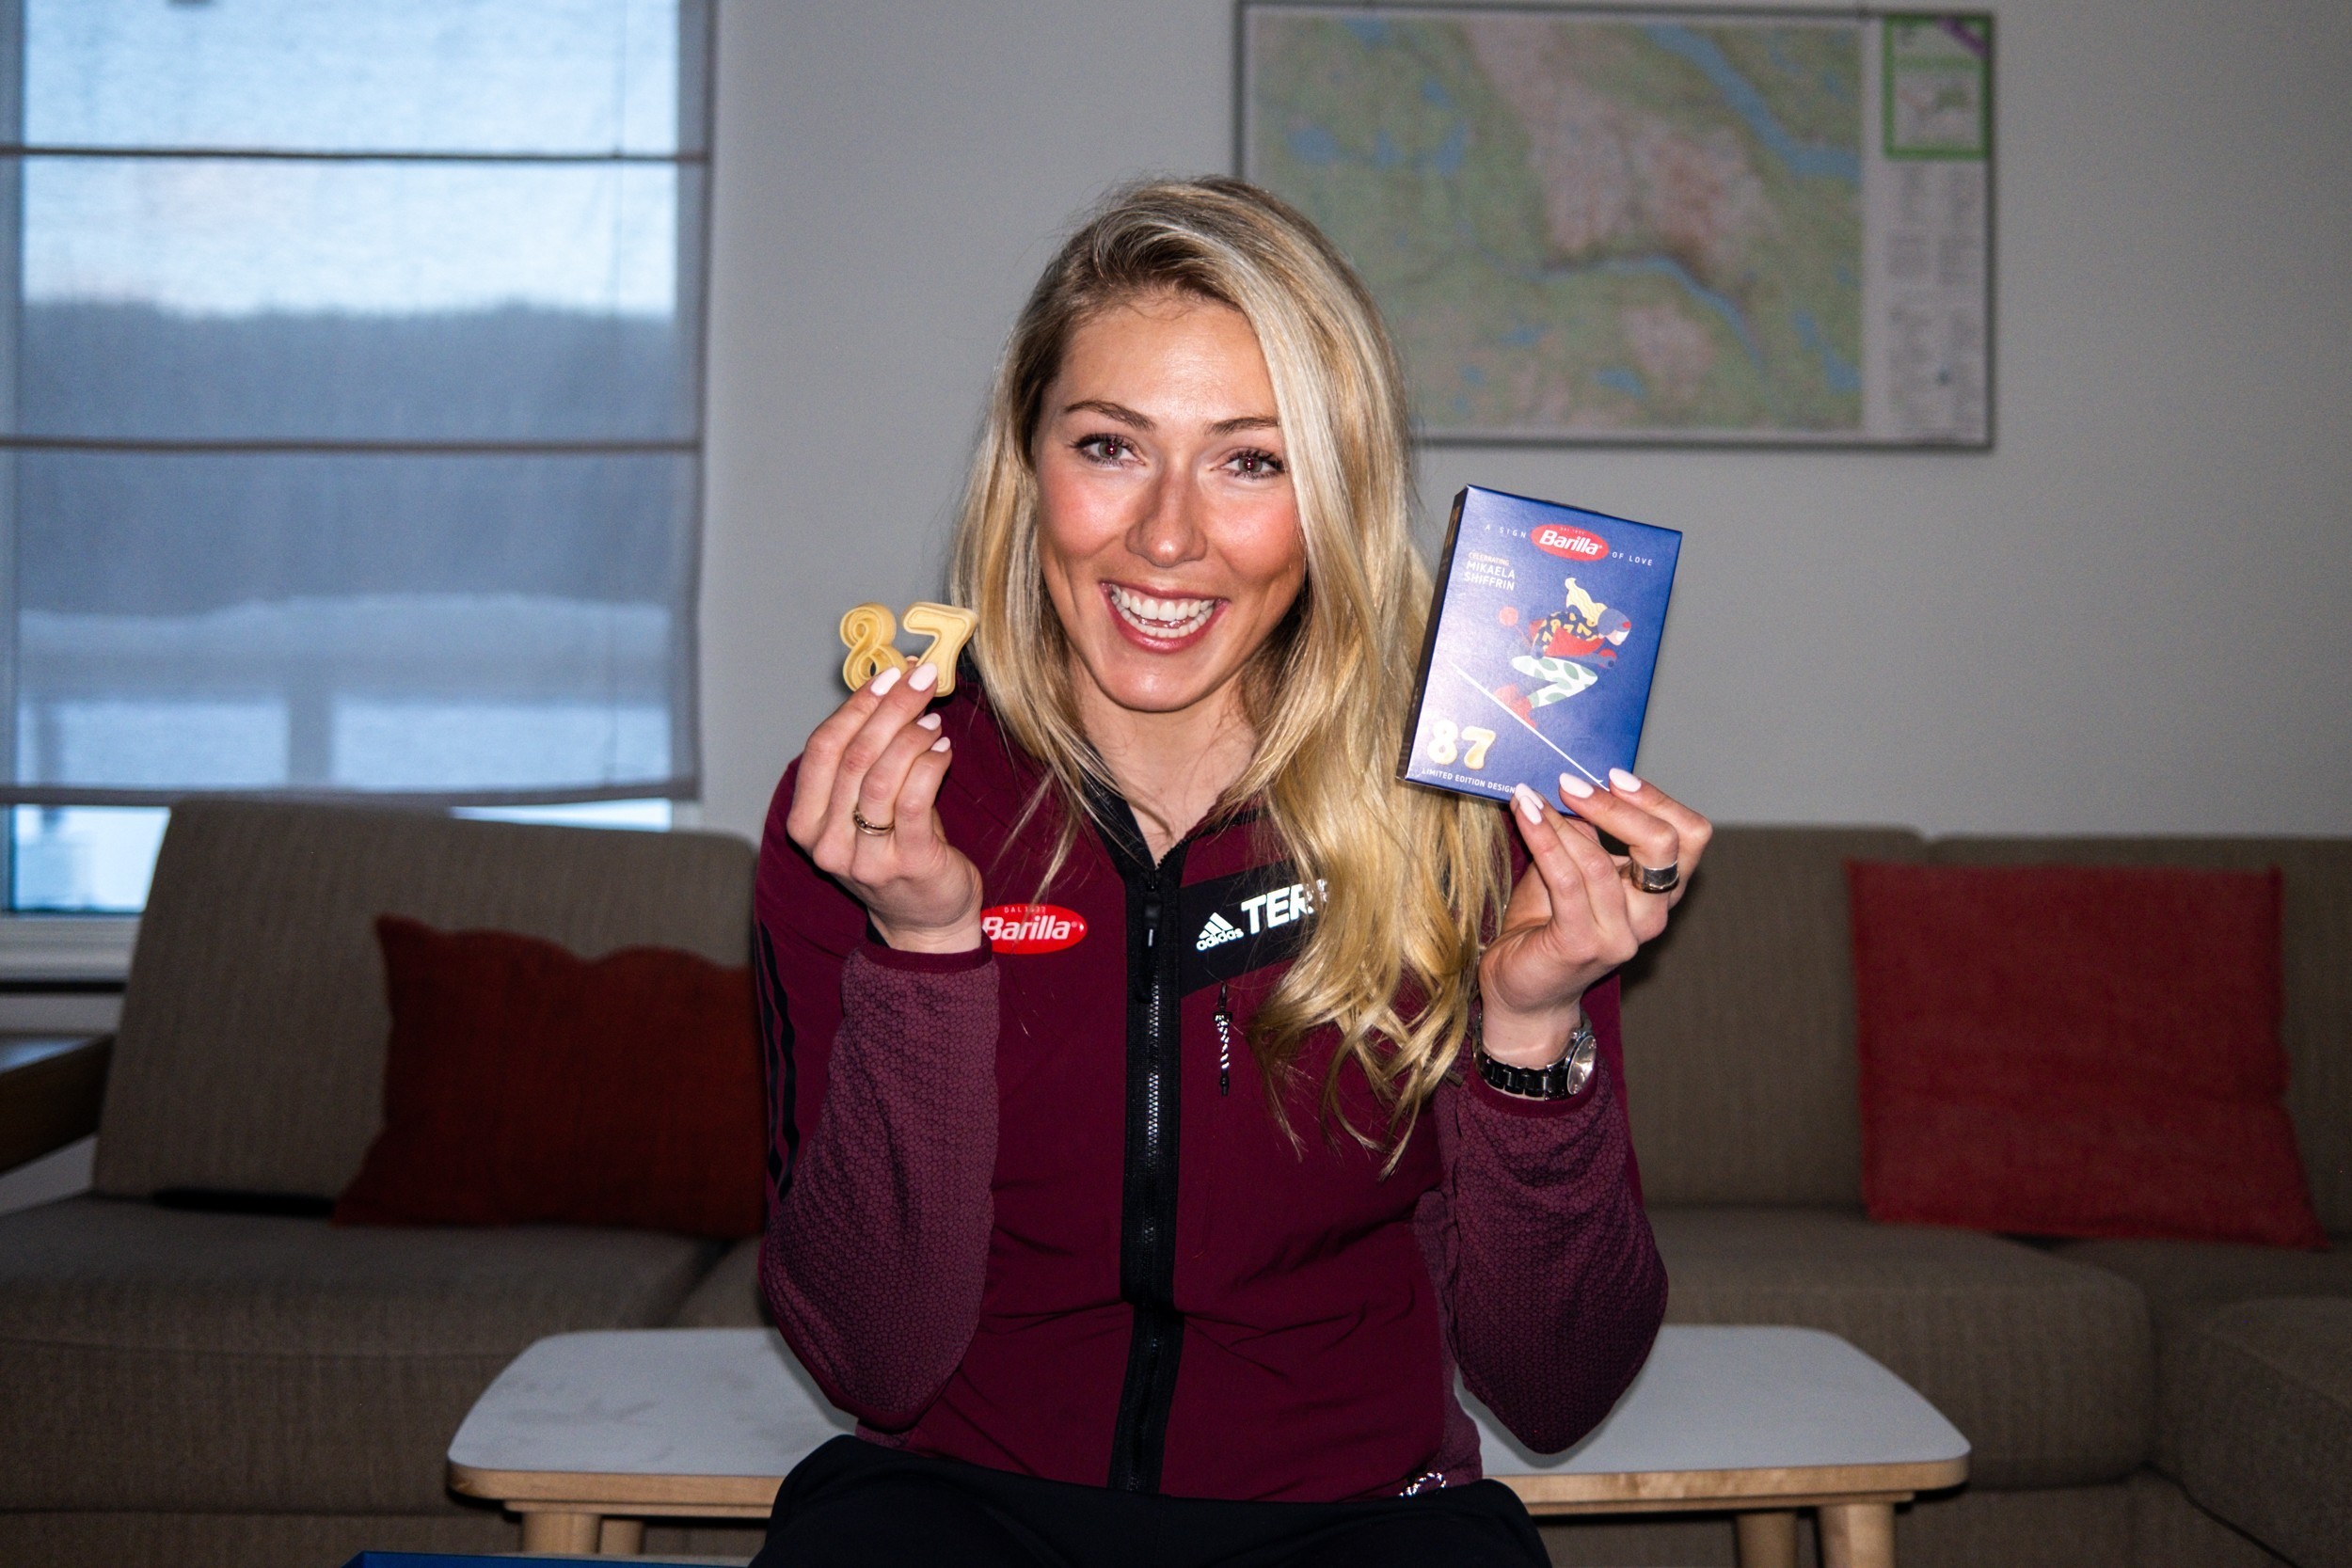 Barilla & Mikaela Shiffrin: Greatness starts with a great recipe - Pack No. 55